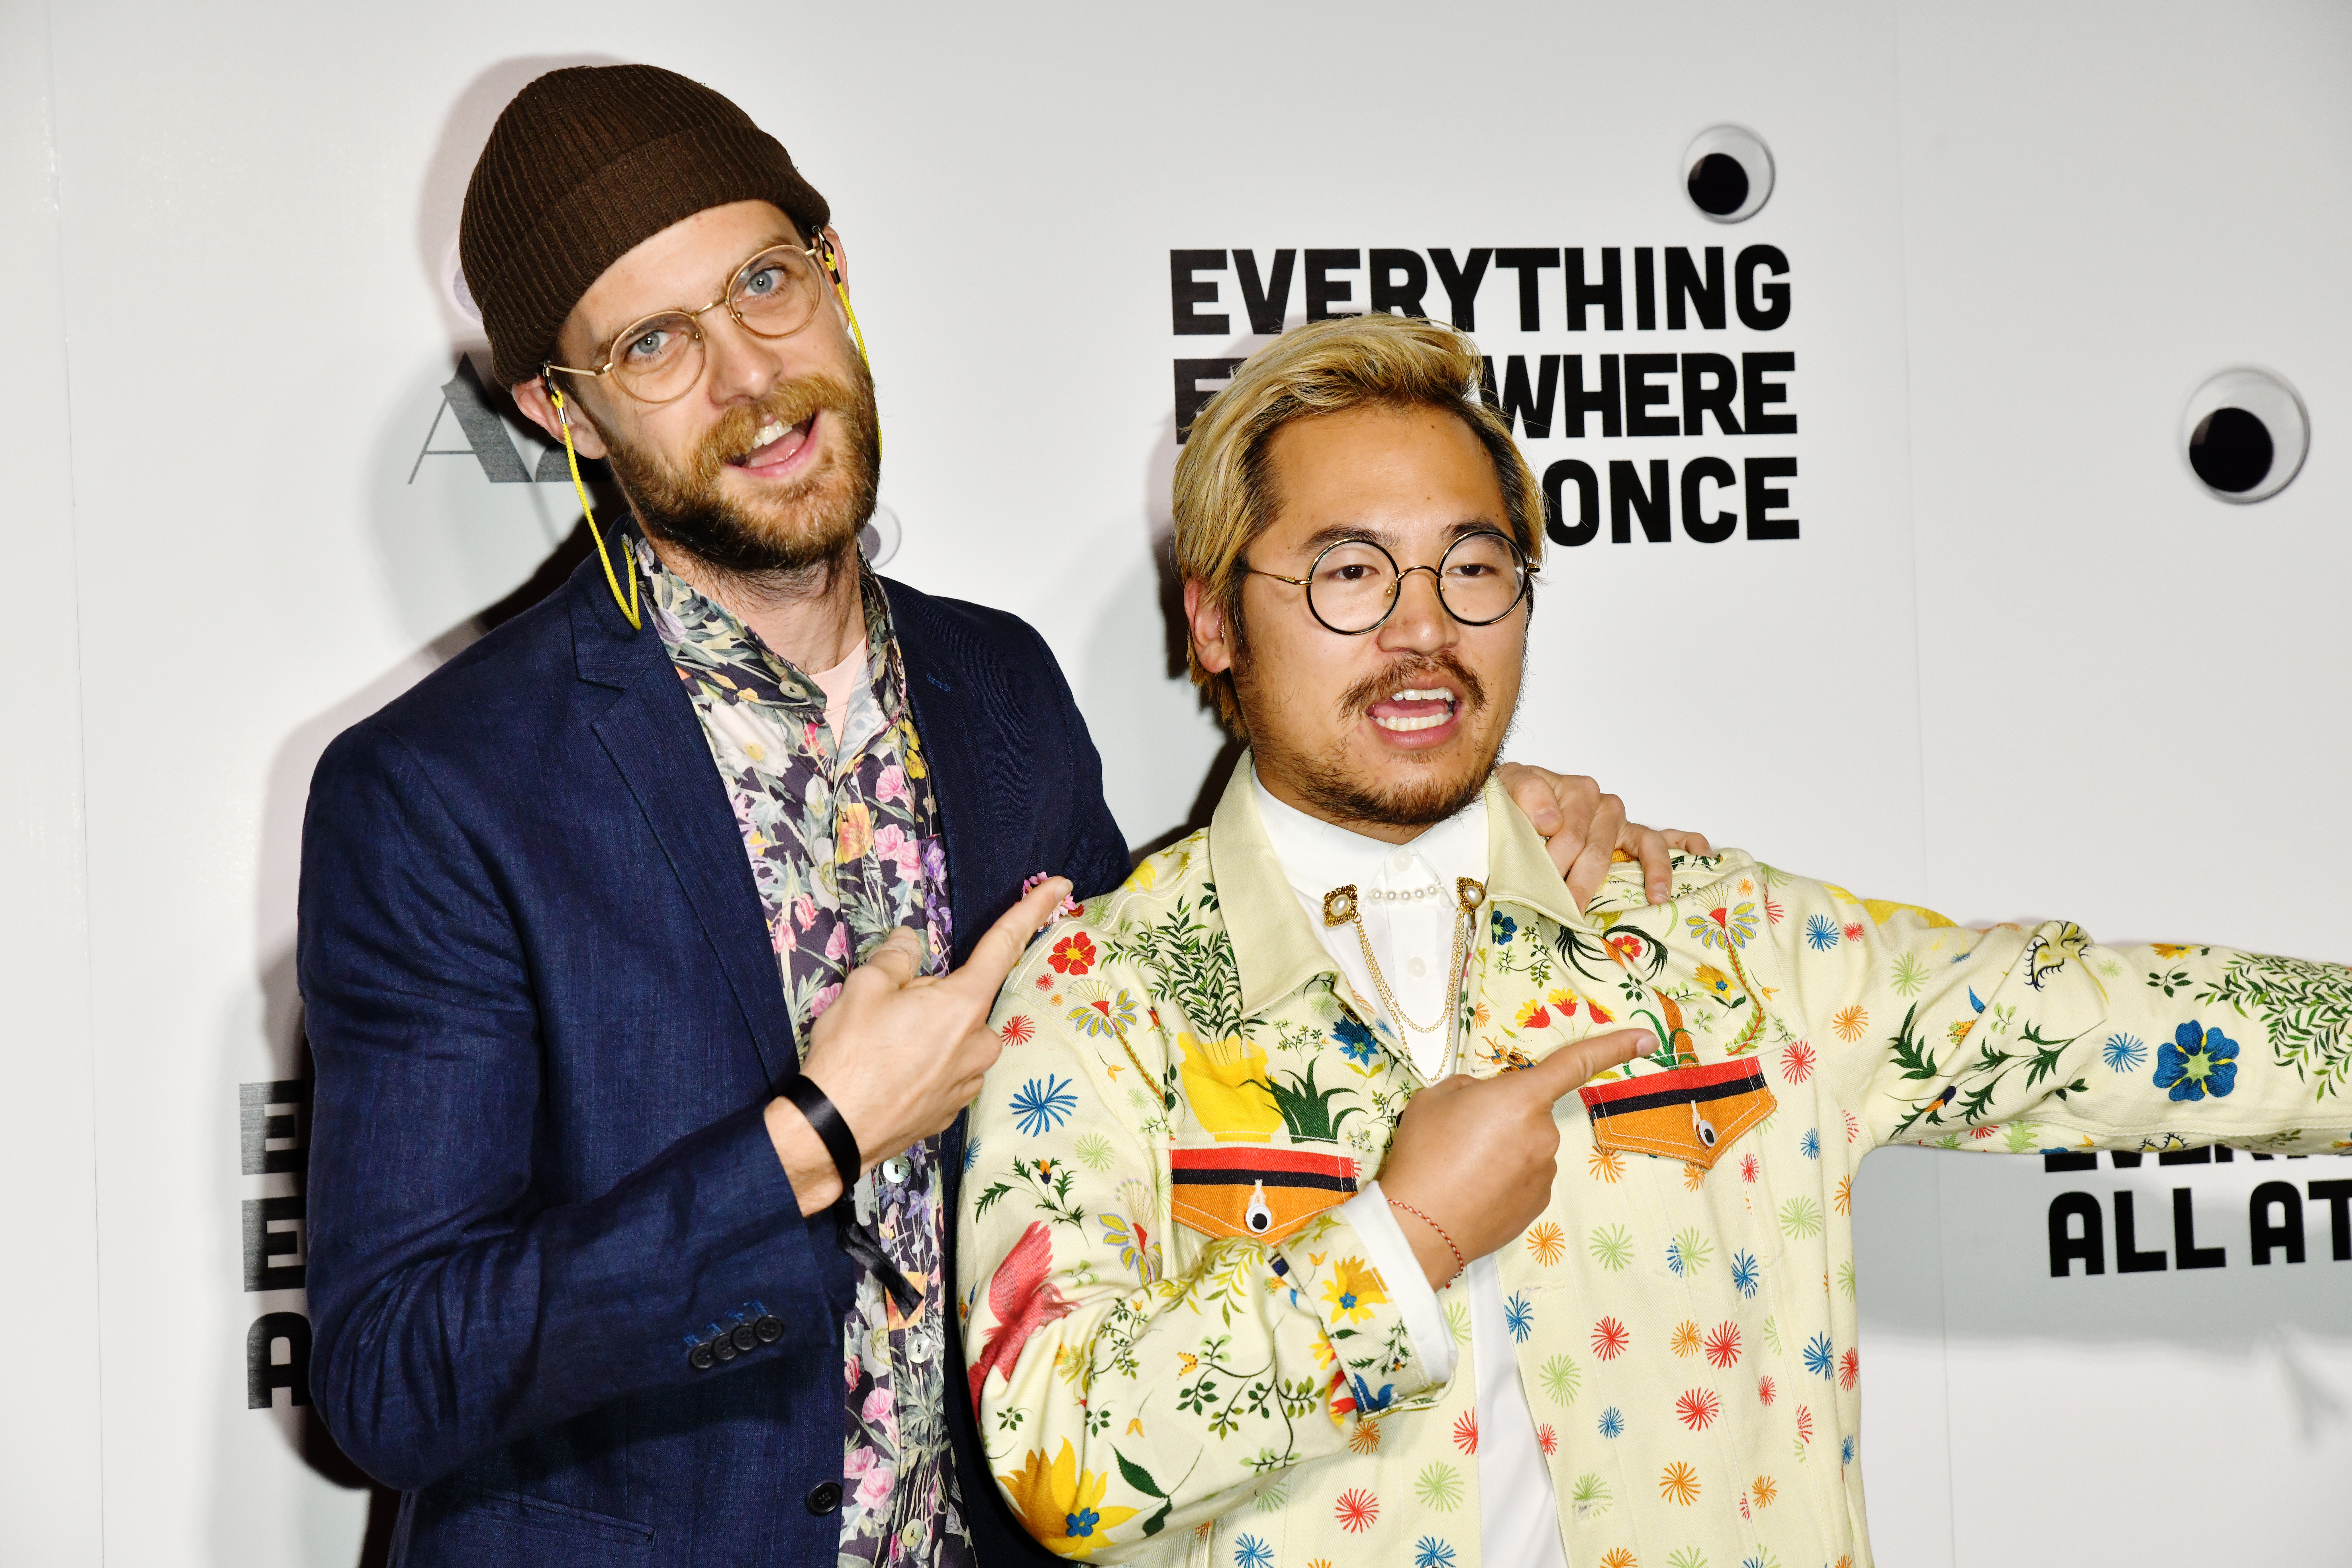 LOS ANGELES, CALIFORNIA - MARCH 23: Daniel Scheinert and Daniel Kwan arrives at the premiere of 'Everything Everywhere All At Once' at The Theatre at Ace Hotel on March 23, 2022 in Los Angeles, California. (Photo by Jerod Harris/FilmMagic)